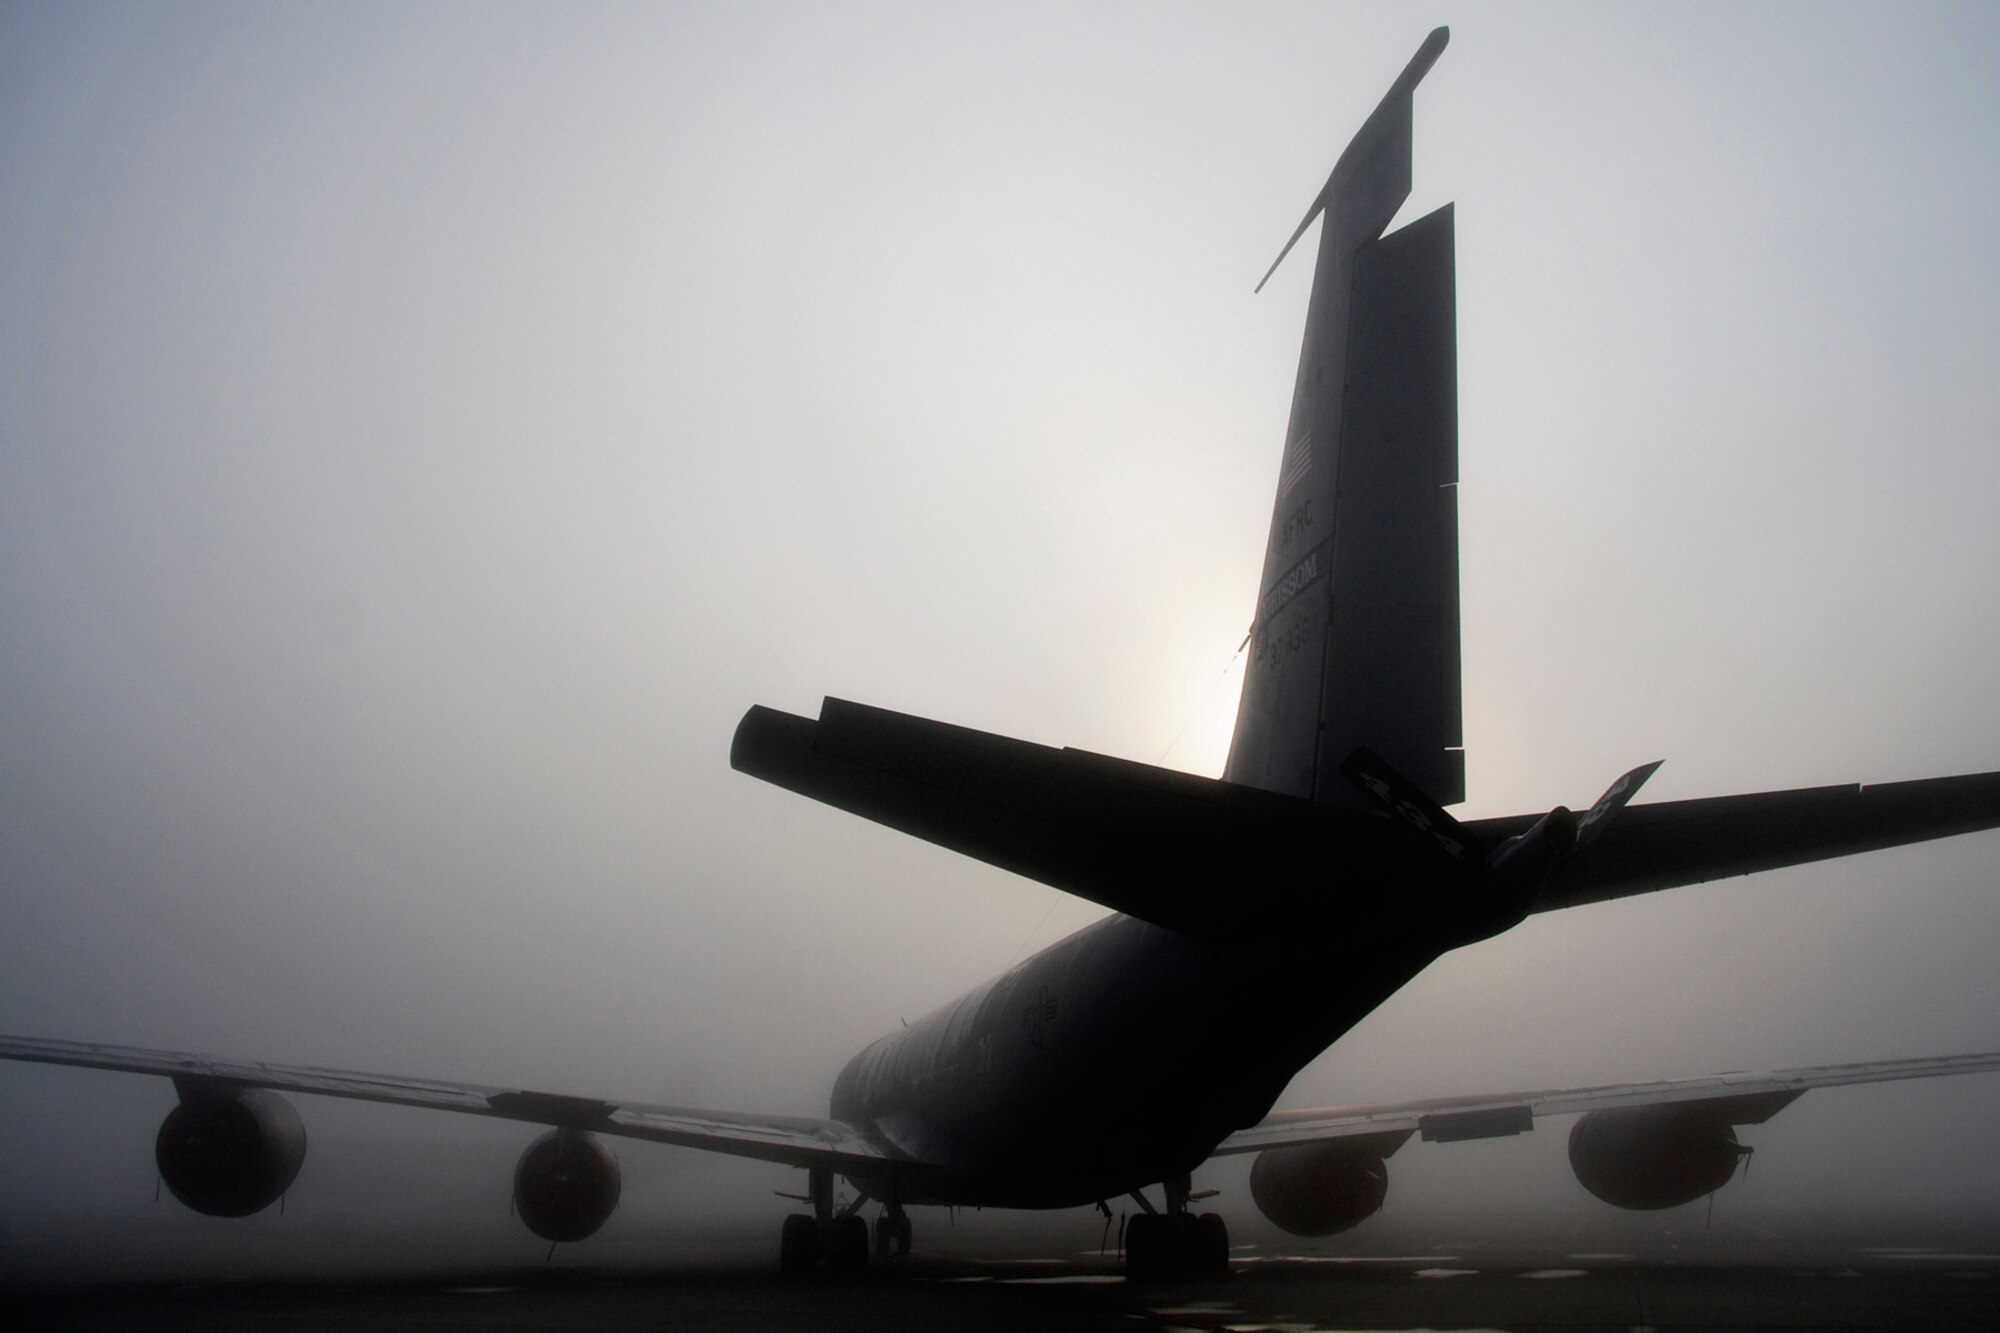 GRISSSOM AIR RESERVE BASE, Ind. -- Surrounded by a dense fog, a KC-135R Stratotanker at Grissom sits on the flight line Aug. 7. Sixteen KC-135s are assigned to the 434th Air Refueling Wing at Grissom, making it the largest Stratotanker unit in the Air Force Reserve. Four turbofans, mounted under 35-degree swept wings, power the KC-135 to takeoffs at gross weights up to 322,500 pounds. Nearly all internal fuel can be pumped through the flying boom, the KC-135's primary fuel transfer method. (U.S. Air Force photo/Tech. Sgt. Mark R. W. Orders-Woempner)
